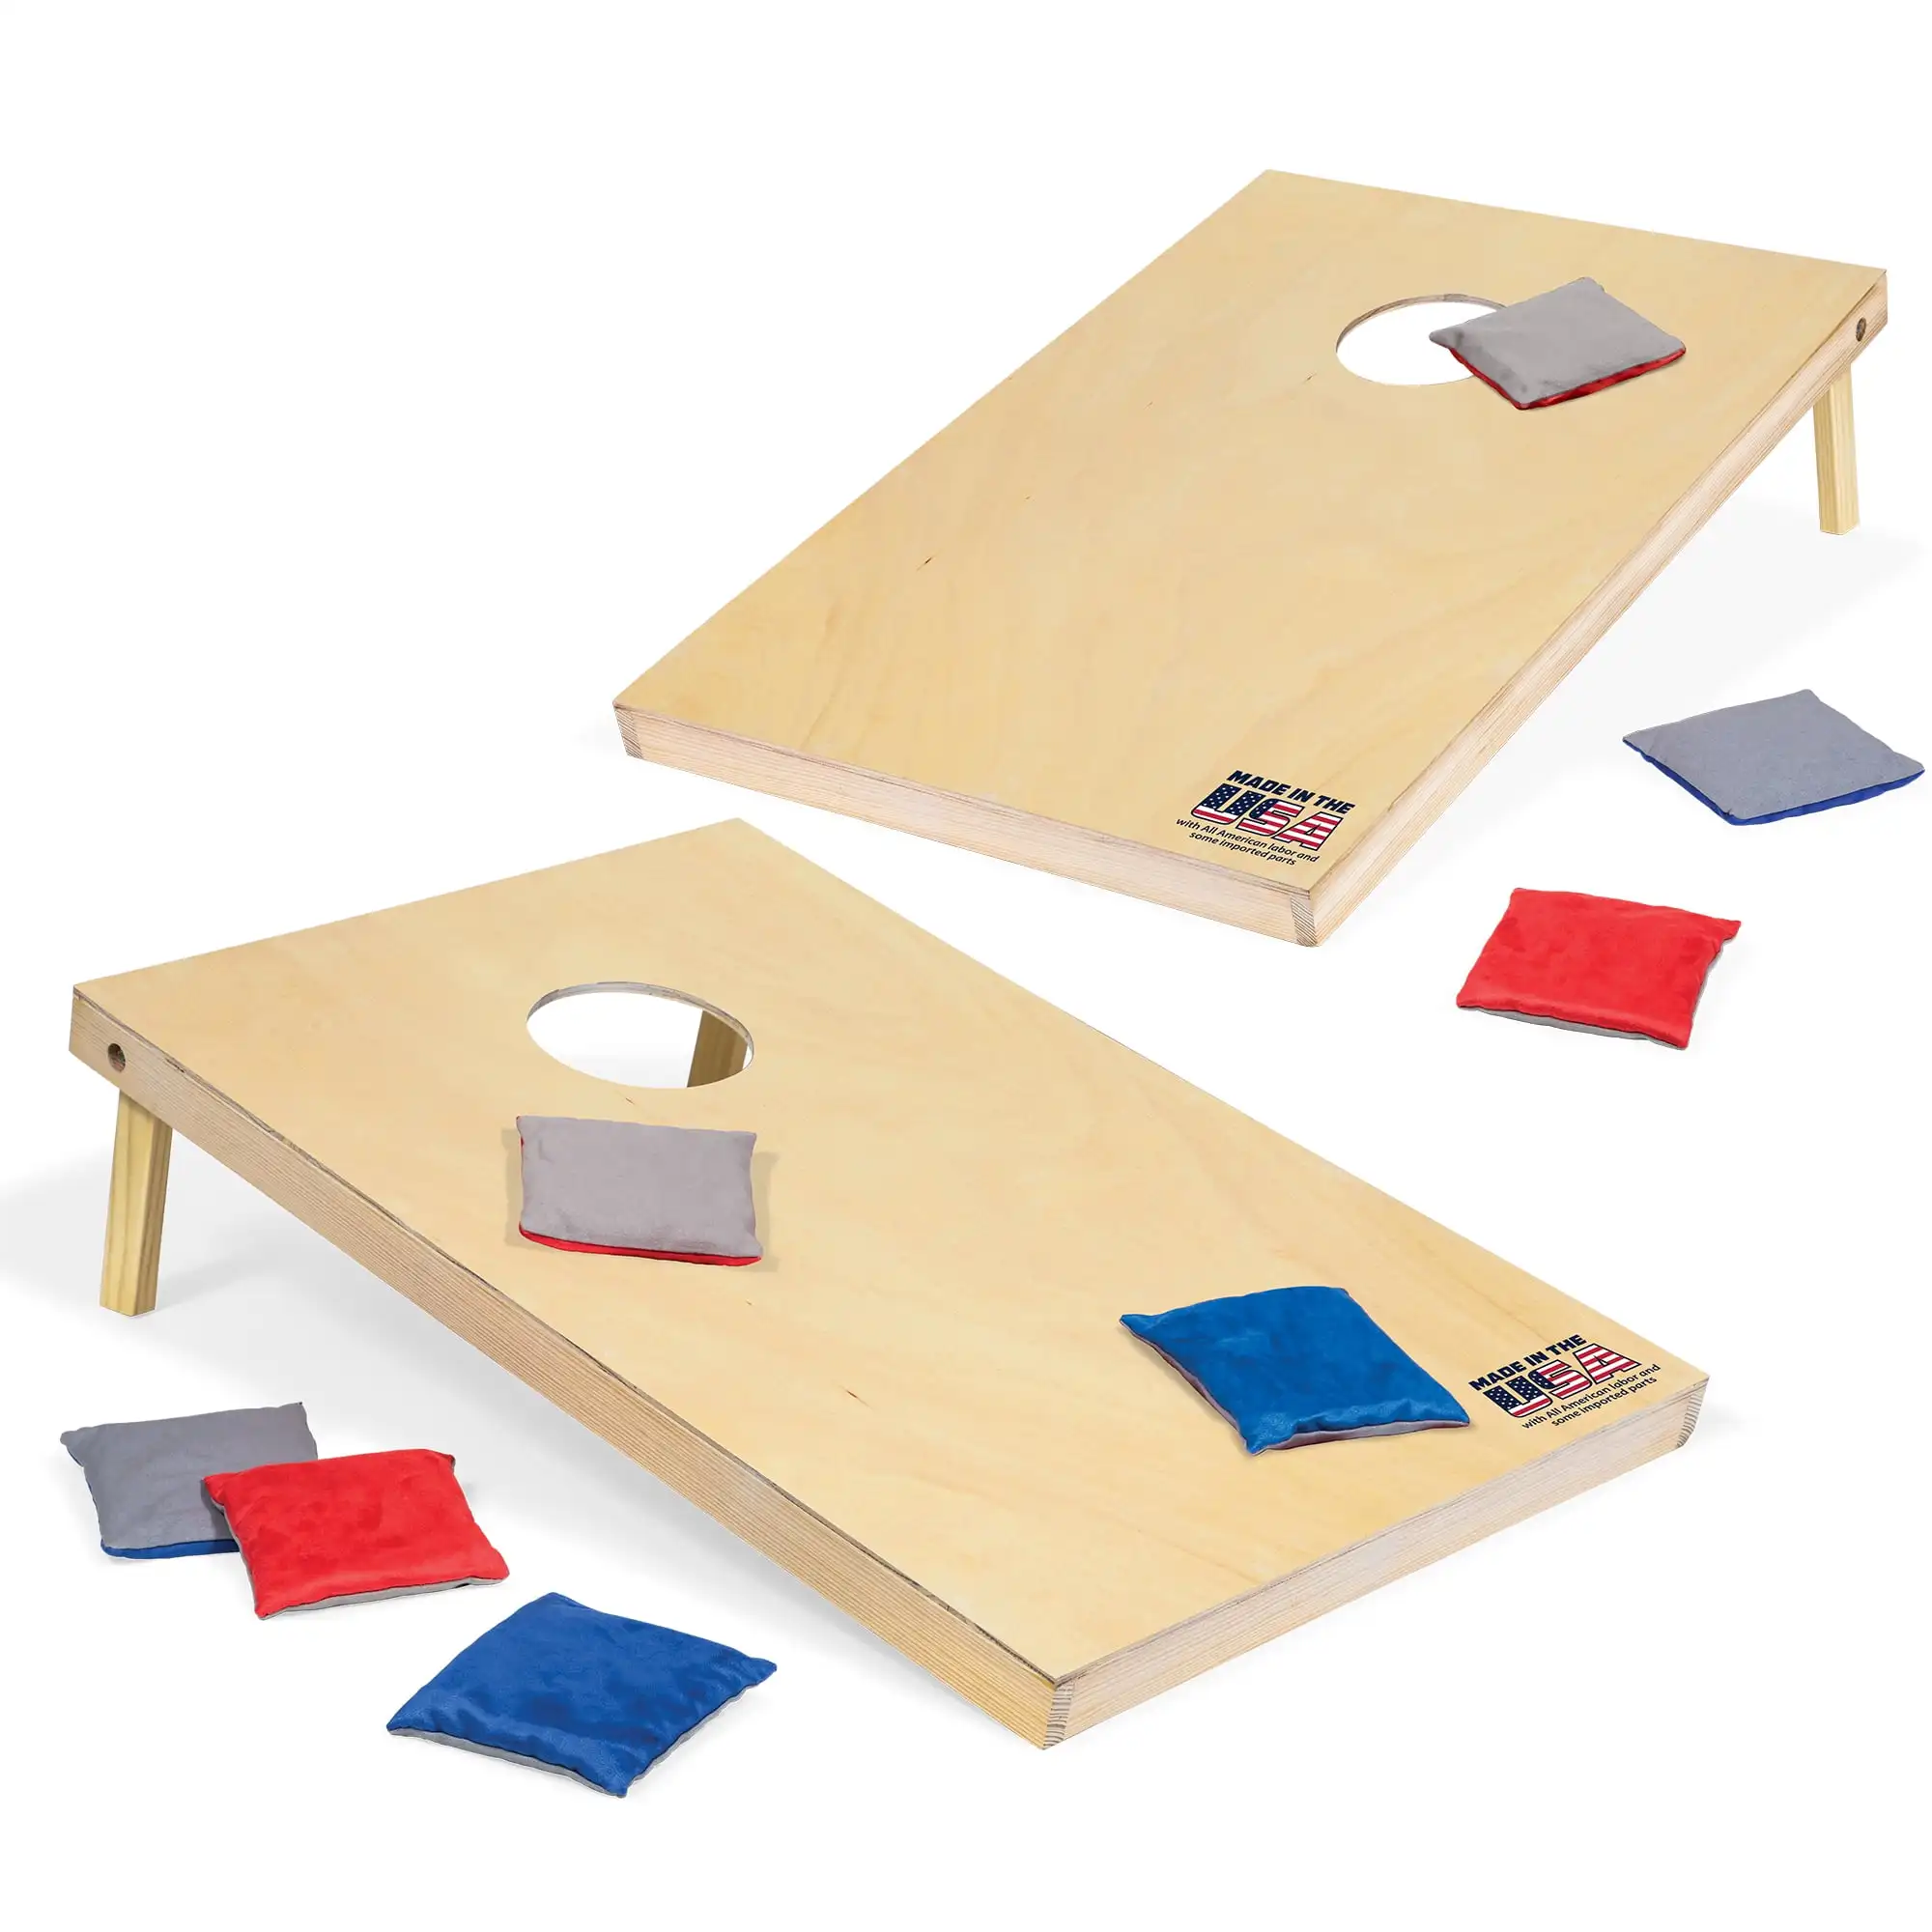 

EastPoint Sports 2' x 3' Cornhole Boards - Natural Wood Bean Bag Toss Set with 8 Bean Bags